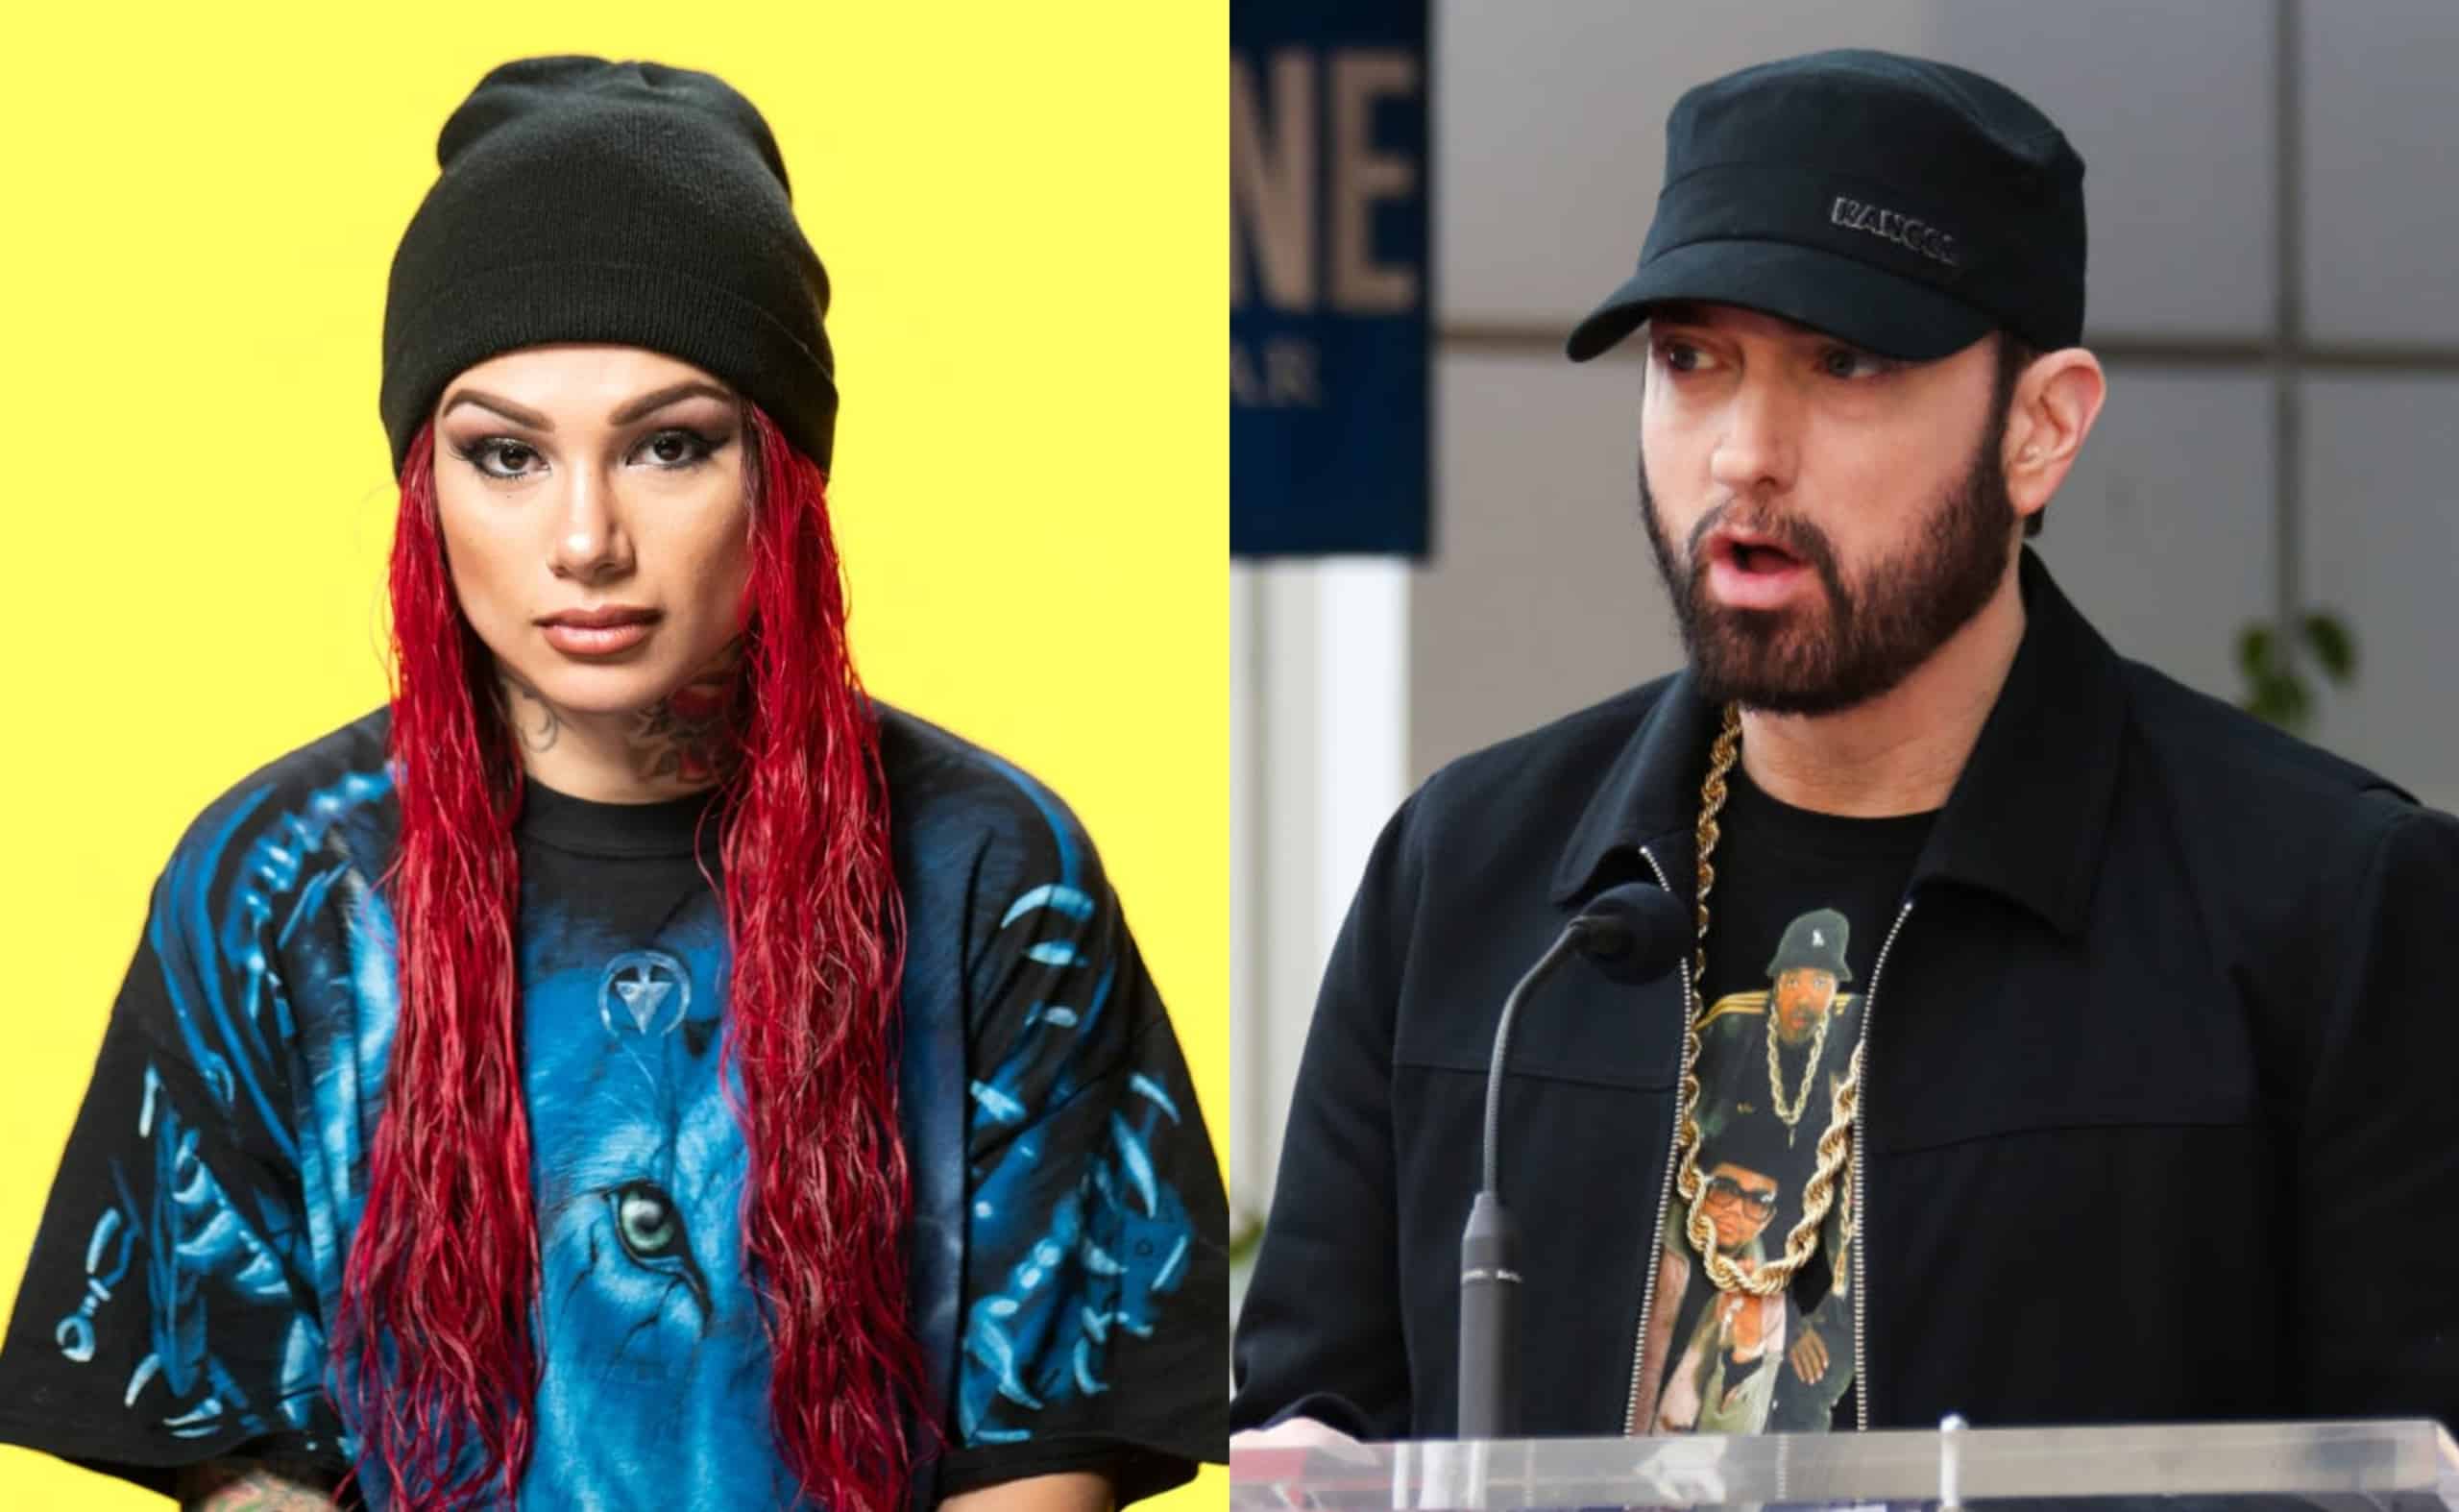 Snow Tha Product Says Eminem, Lauryn Hill is in her DNA